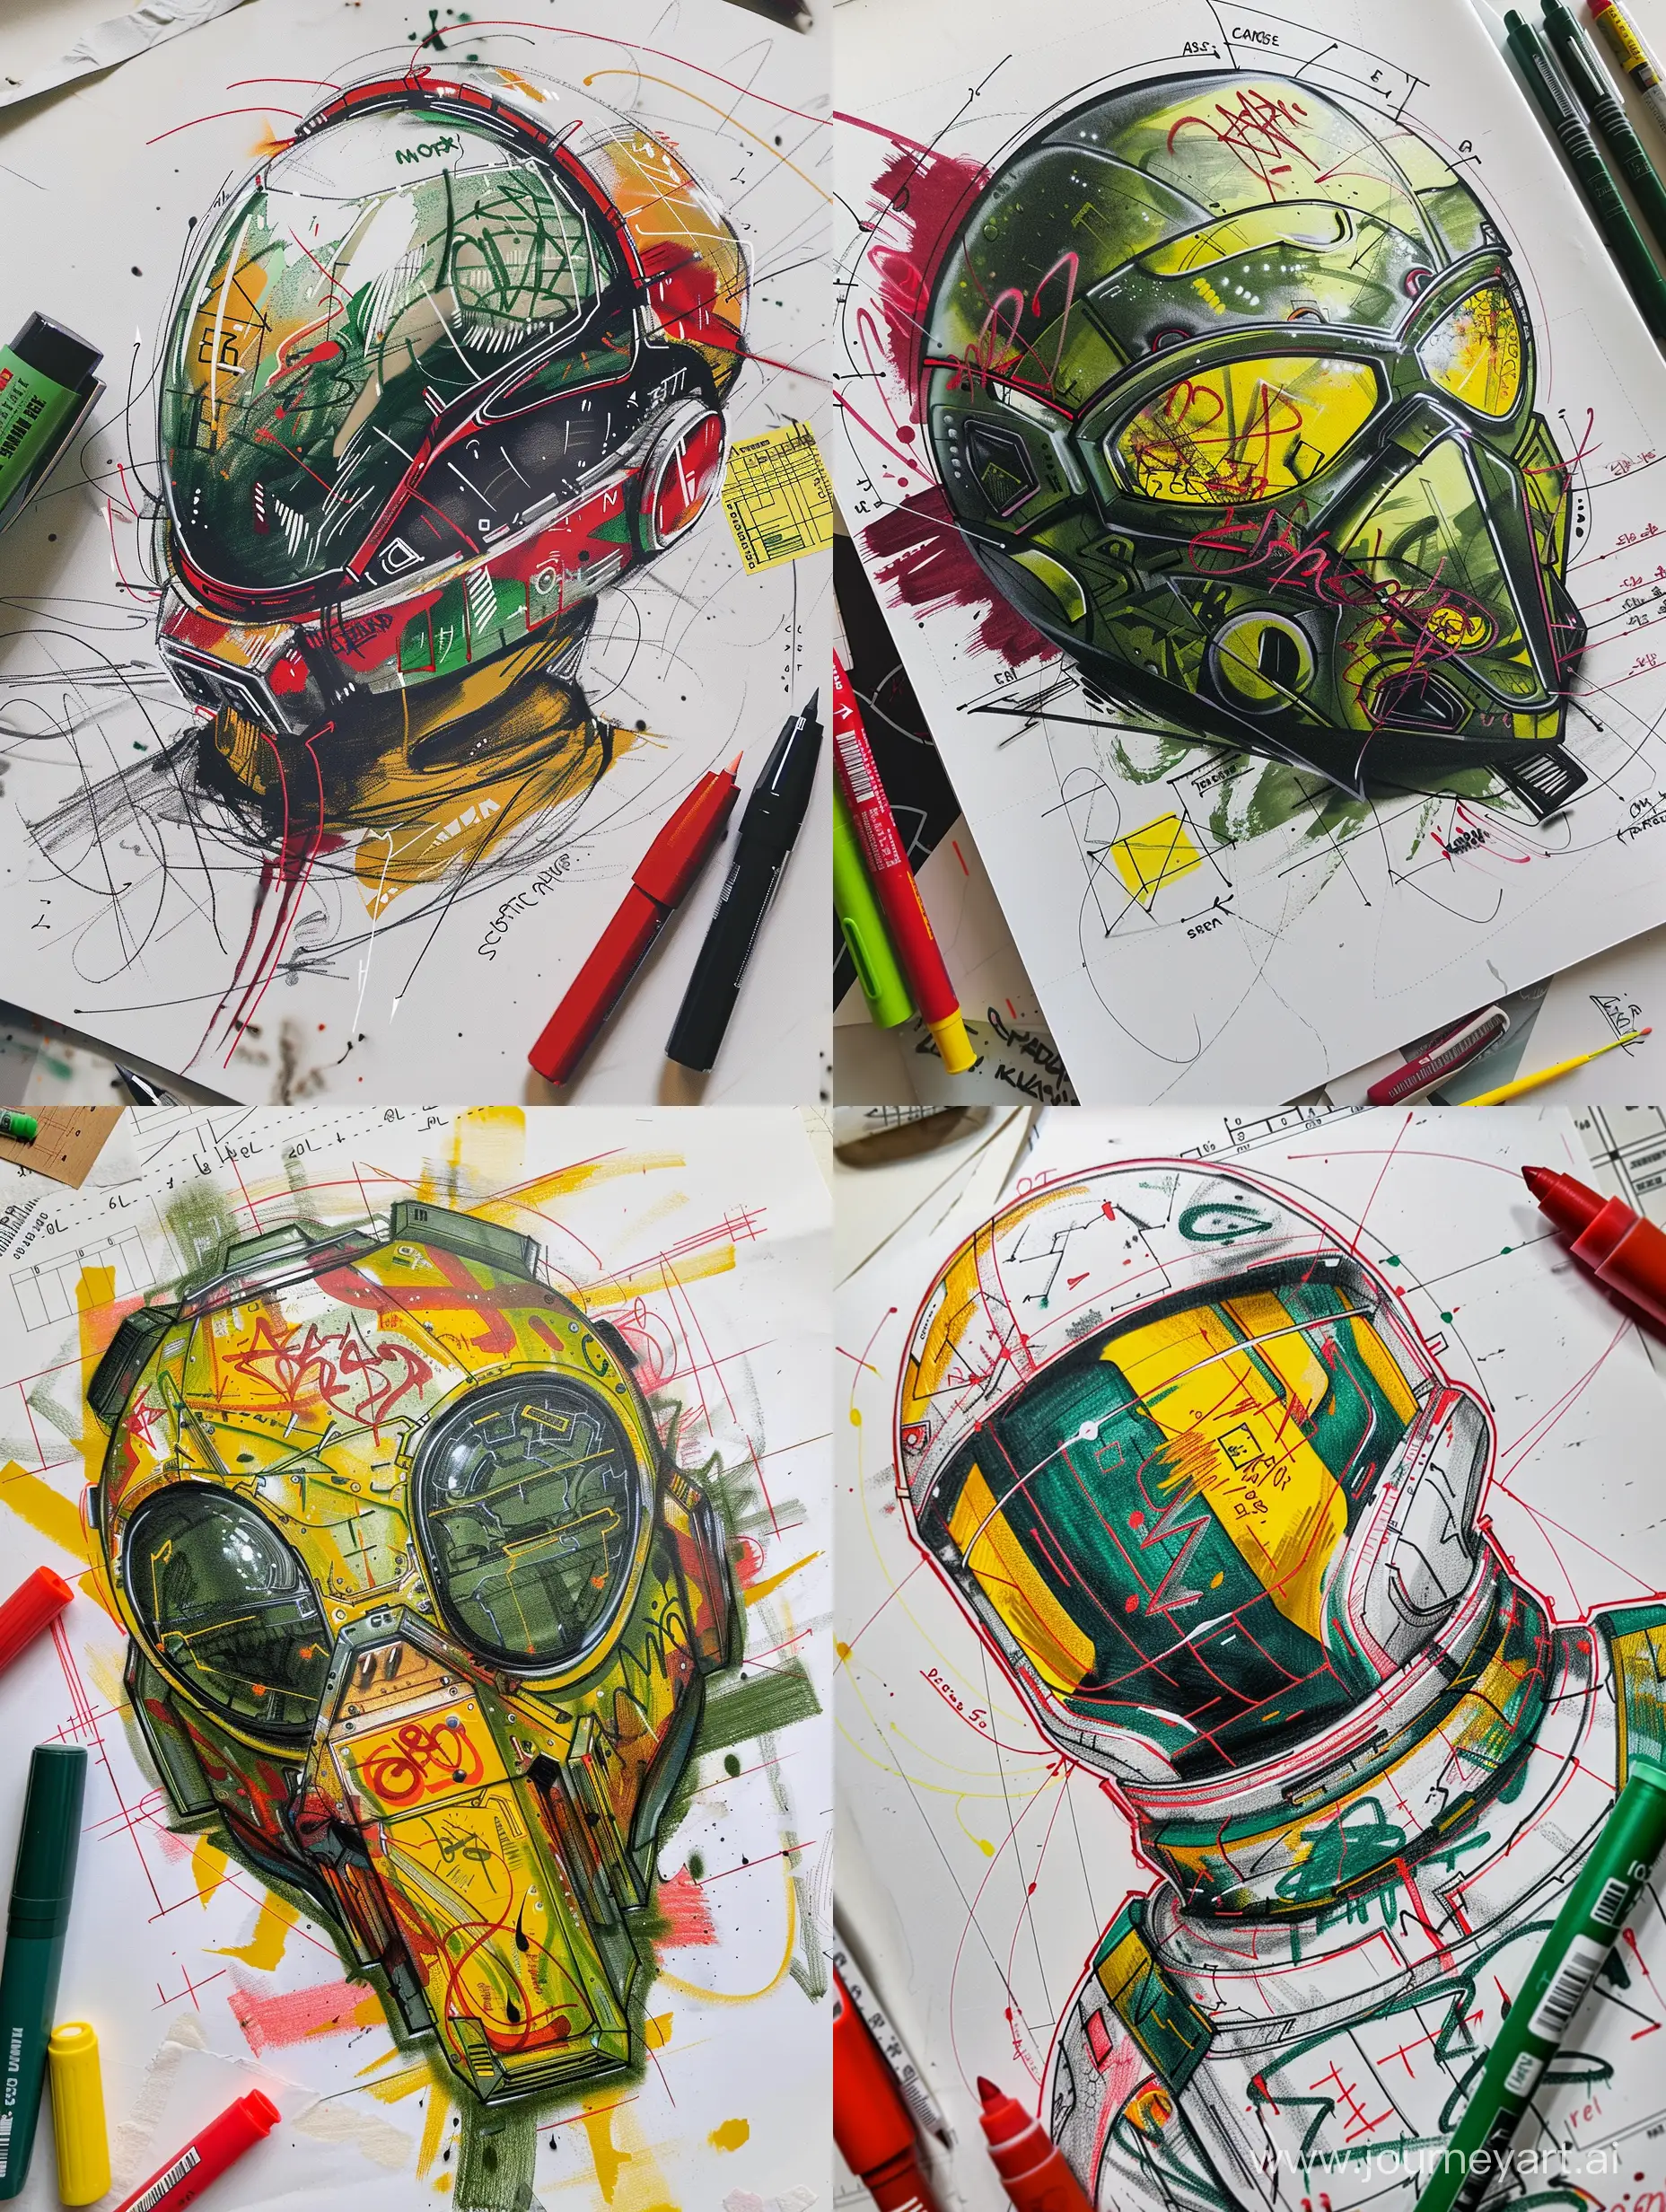 SciFi-Astronaut-Mask-Covered-in-Graffiti-Vibrant-and-Detailed-Sketch